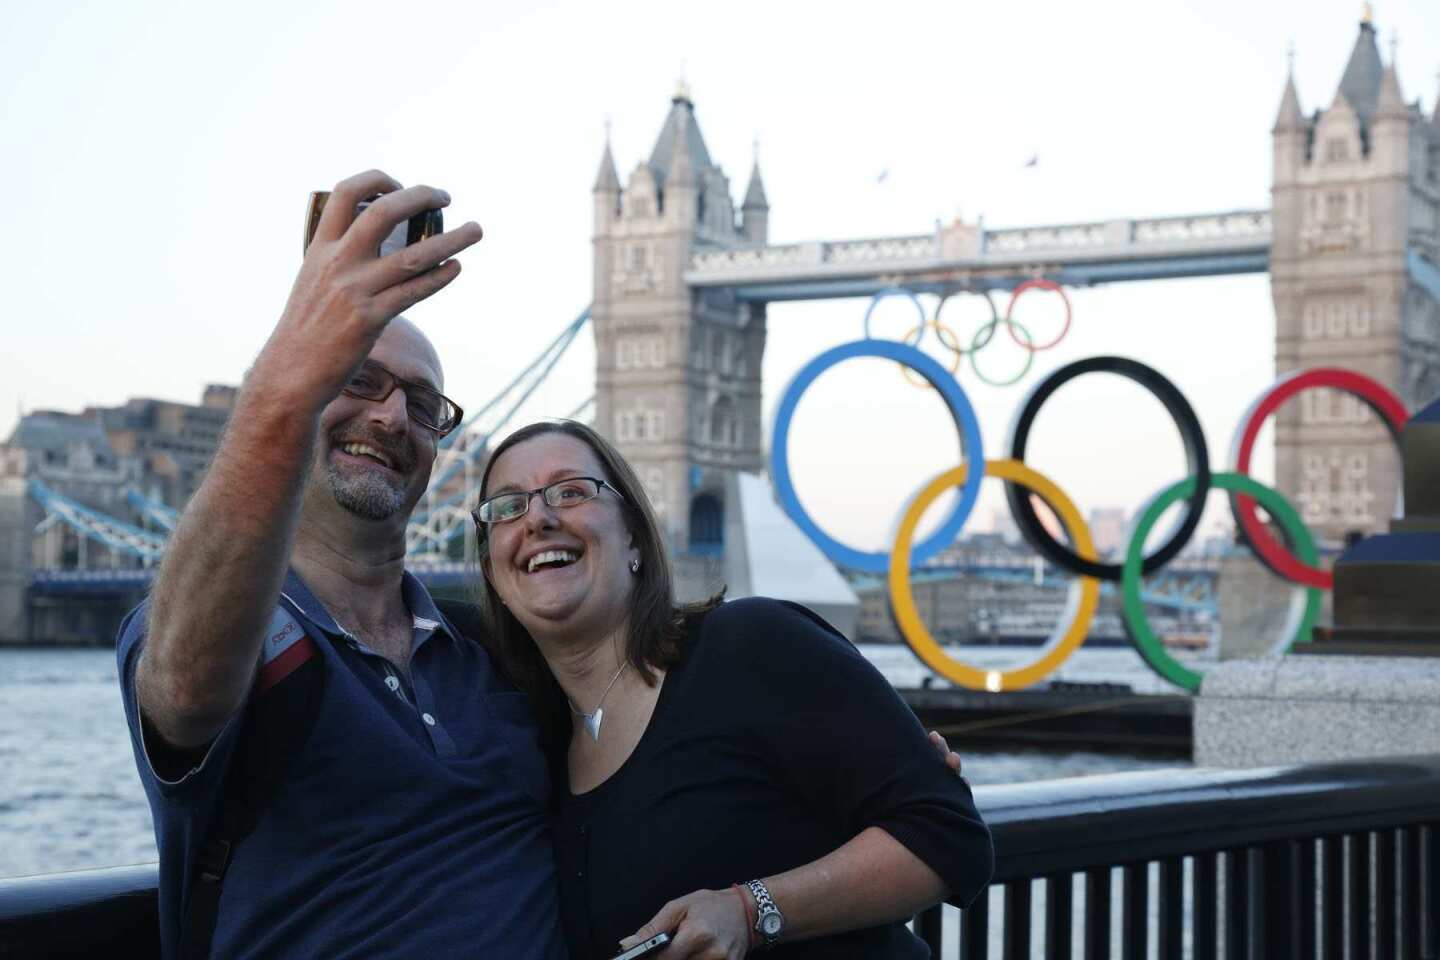 Friends Stephen Hudson and Tracey Tyer take a photo together with Tower Bridge and the Olympic rings at Battersea Park.